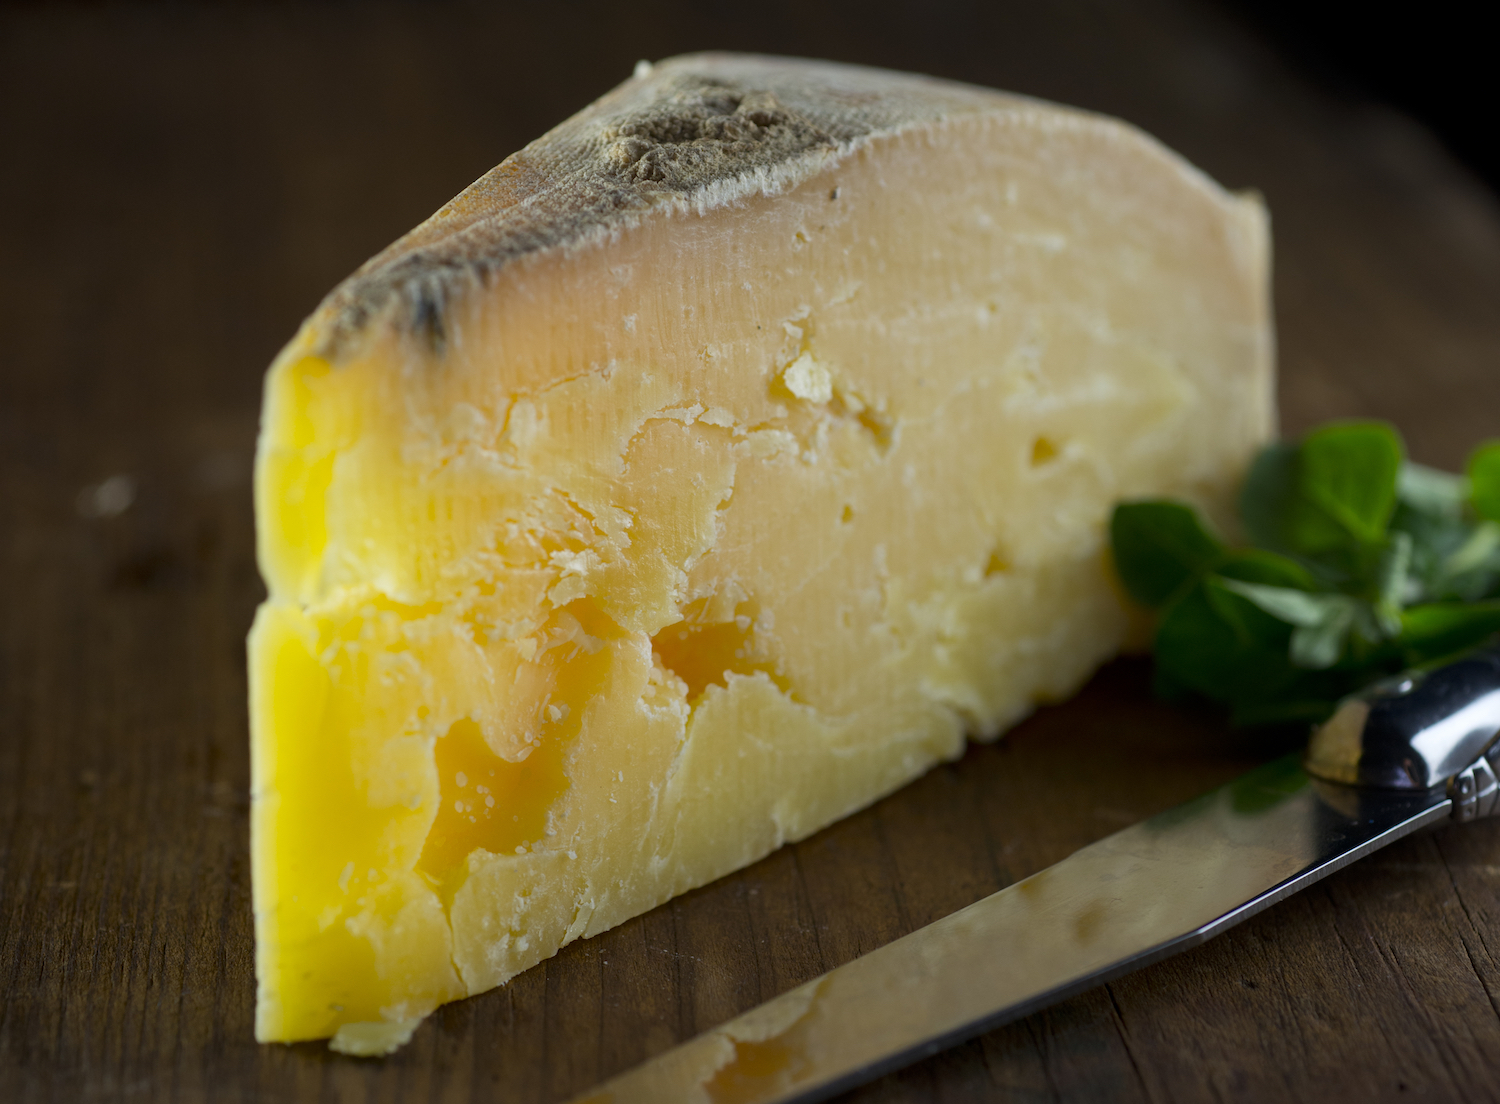 Idaho has a lot of small, local cheesemakers that create a variety of American and International cheeses.